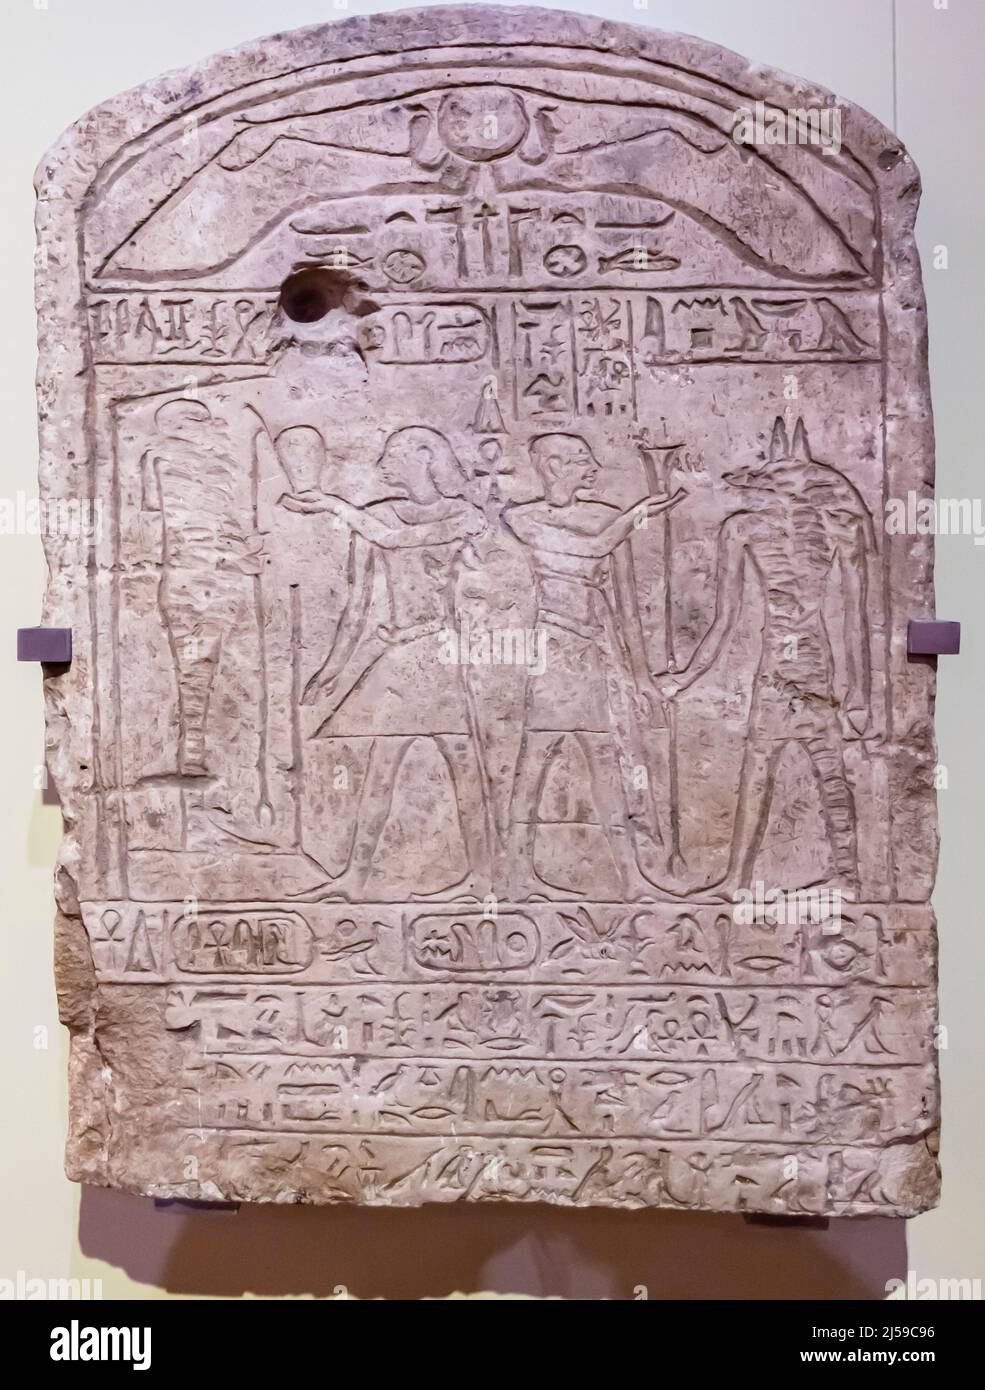 Ancient Egypt - Stela of King Seankhiptah - Limestone - 2nd int period - 13th - 14th Dynasties -1785 - 1633 BC. Ptah, Anubis, Nebsumenu depicted. Stock Photo